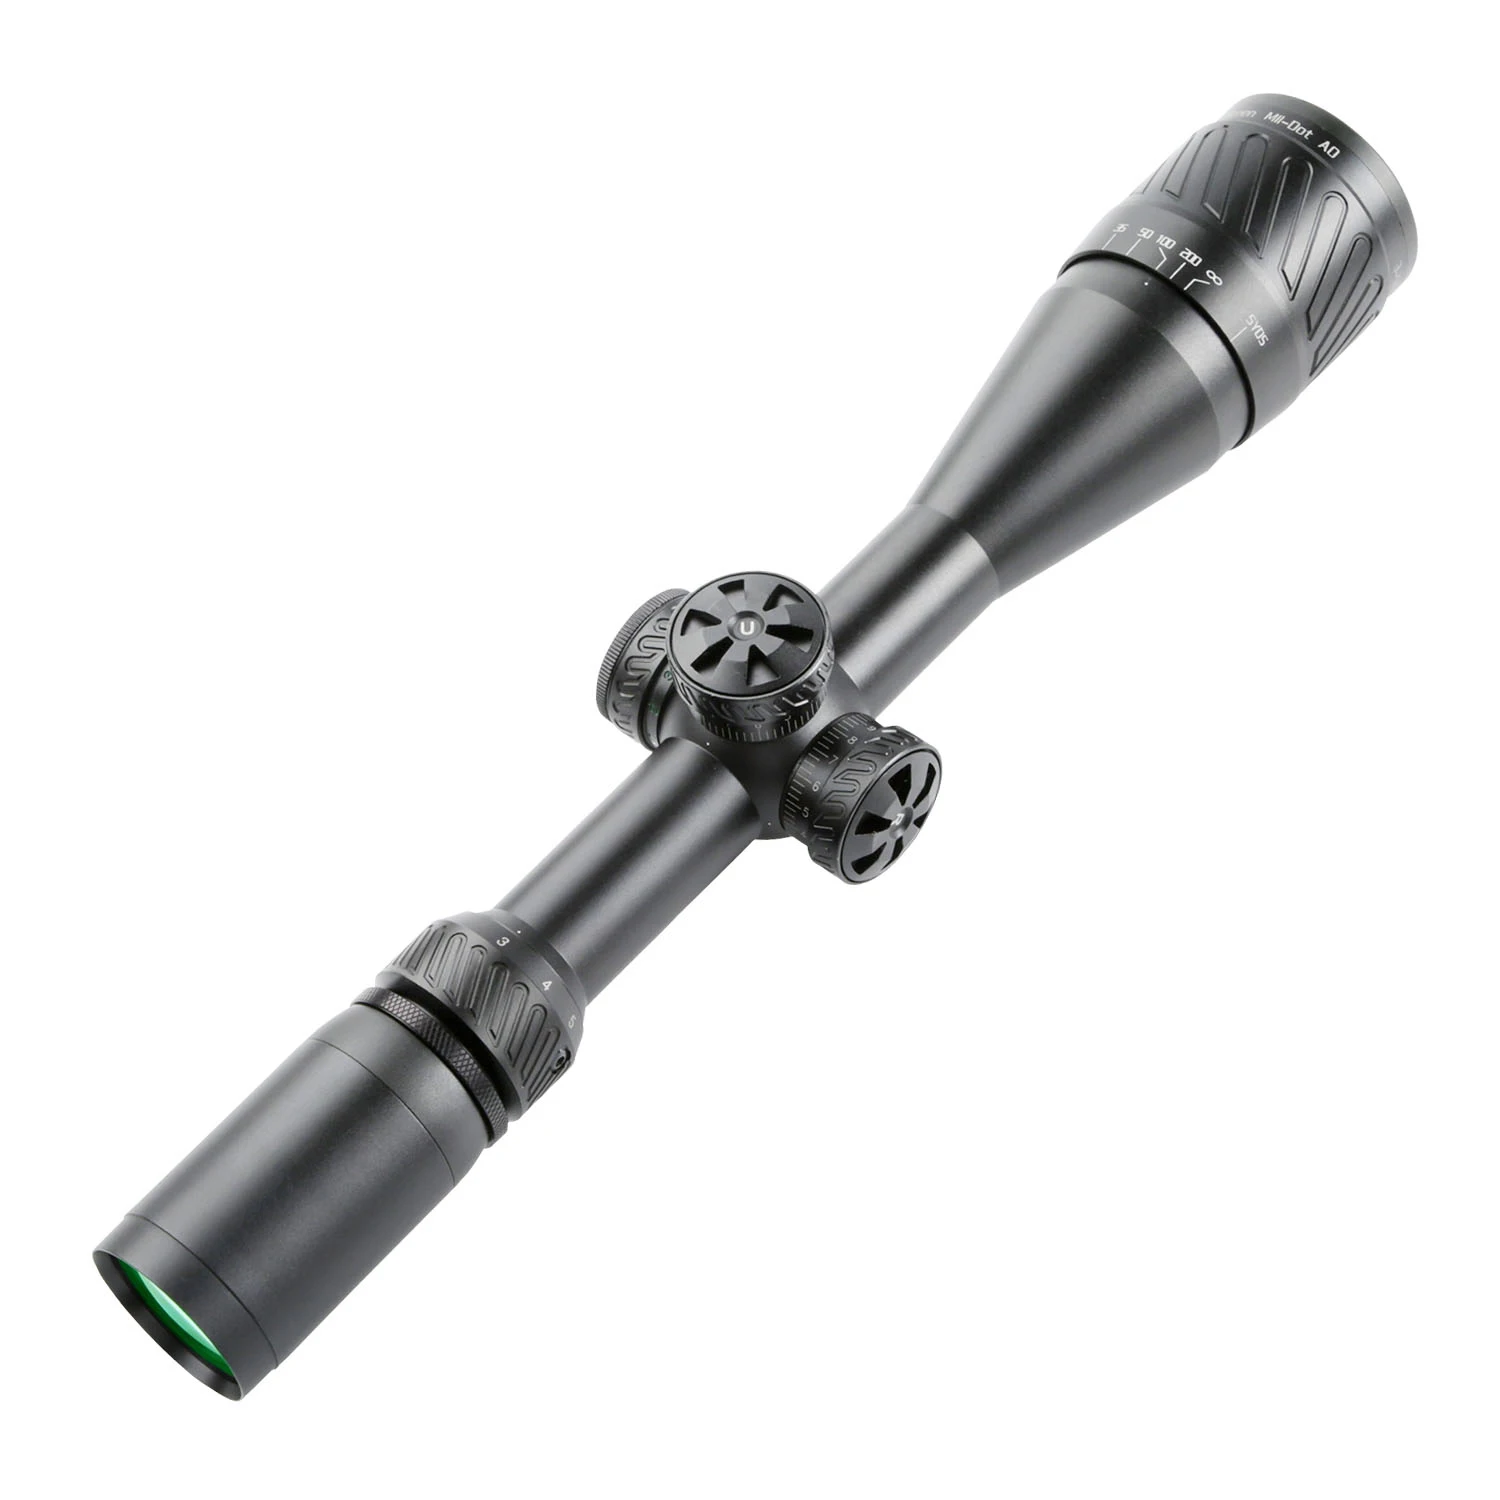 

New Design T-EAGLE SR 3-9X40 AOIRX Hunting tactical riflescope airgun rifle scope with mounts for free